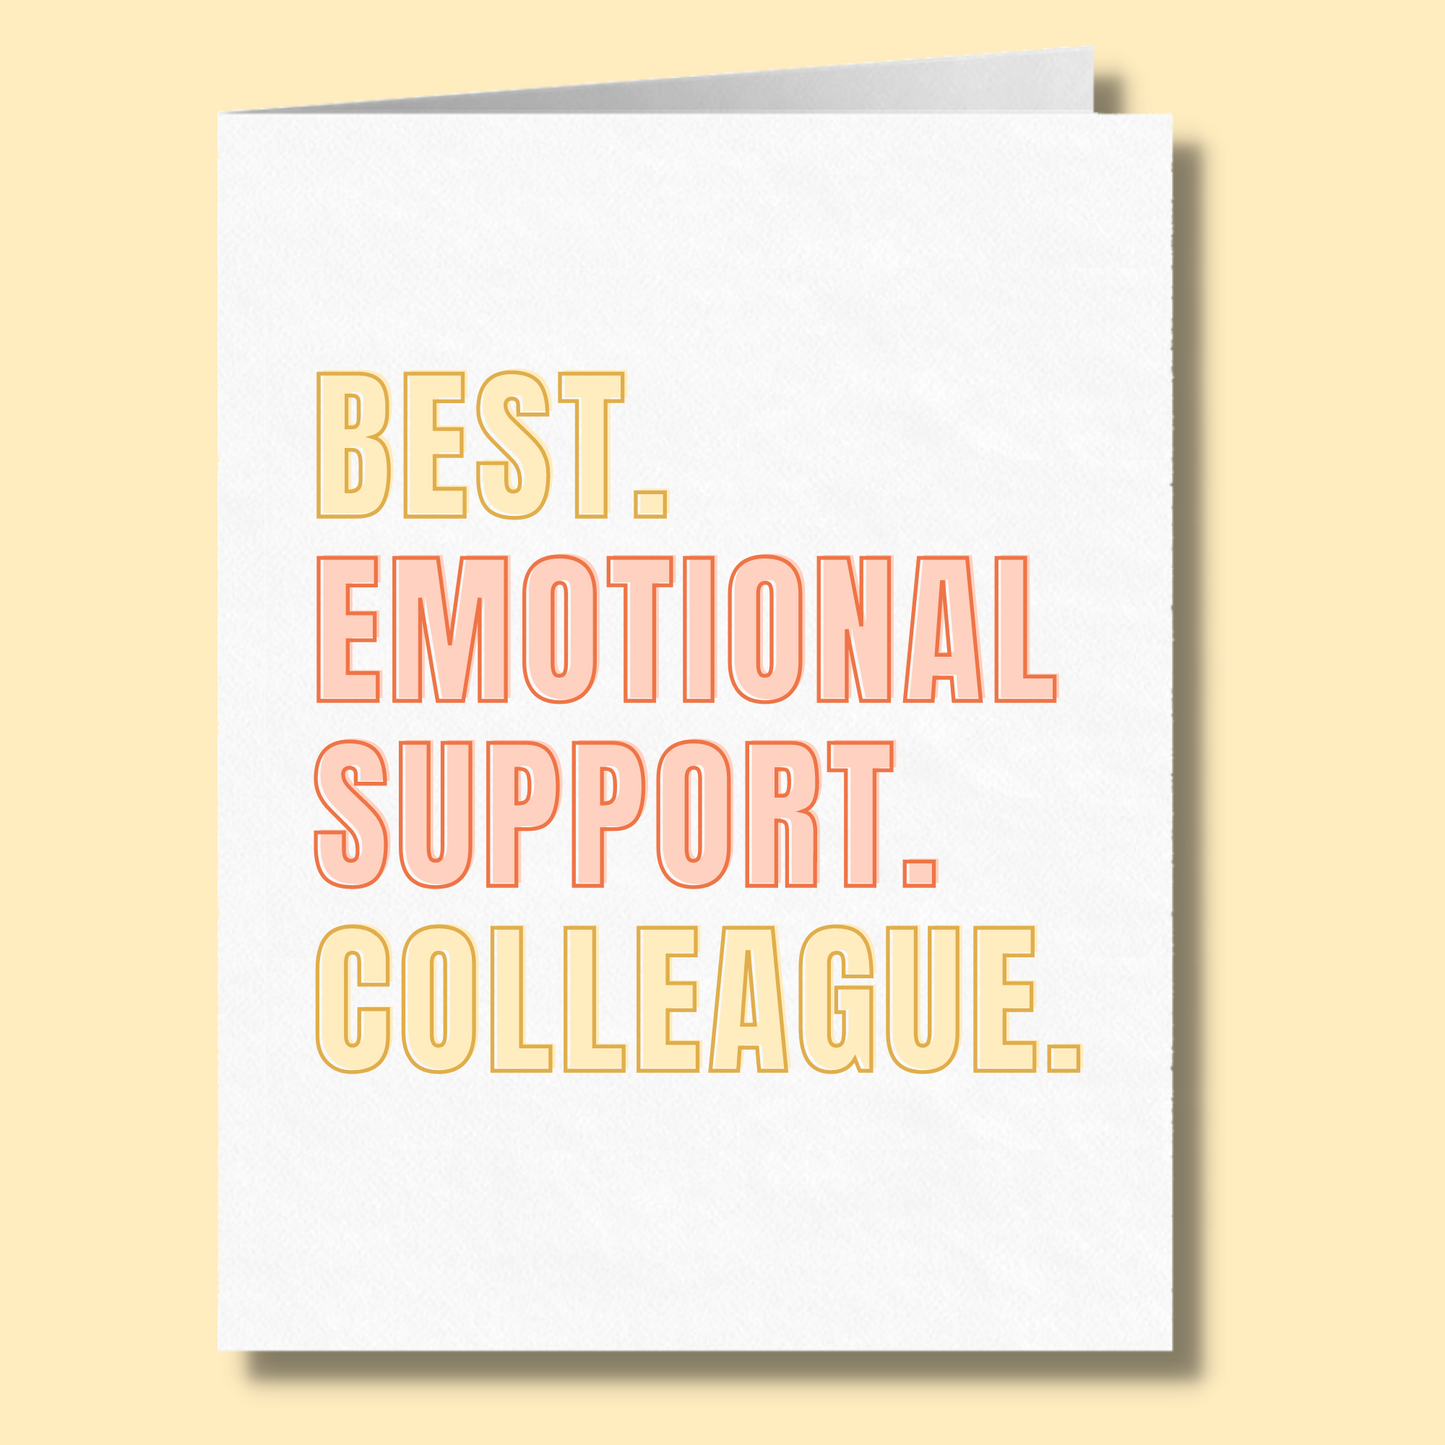 Best Emotional Support Colleague | Saving Me Thousands in Therapist Fees | Funny Greeting Card